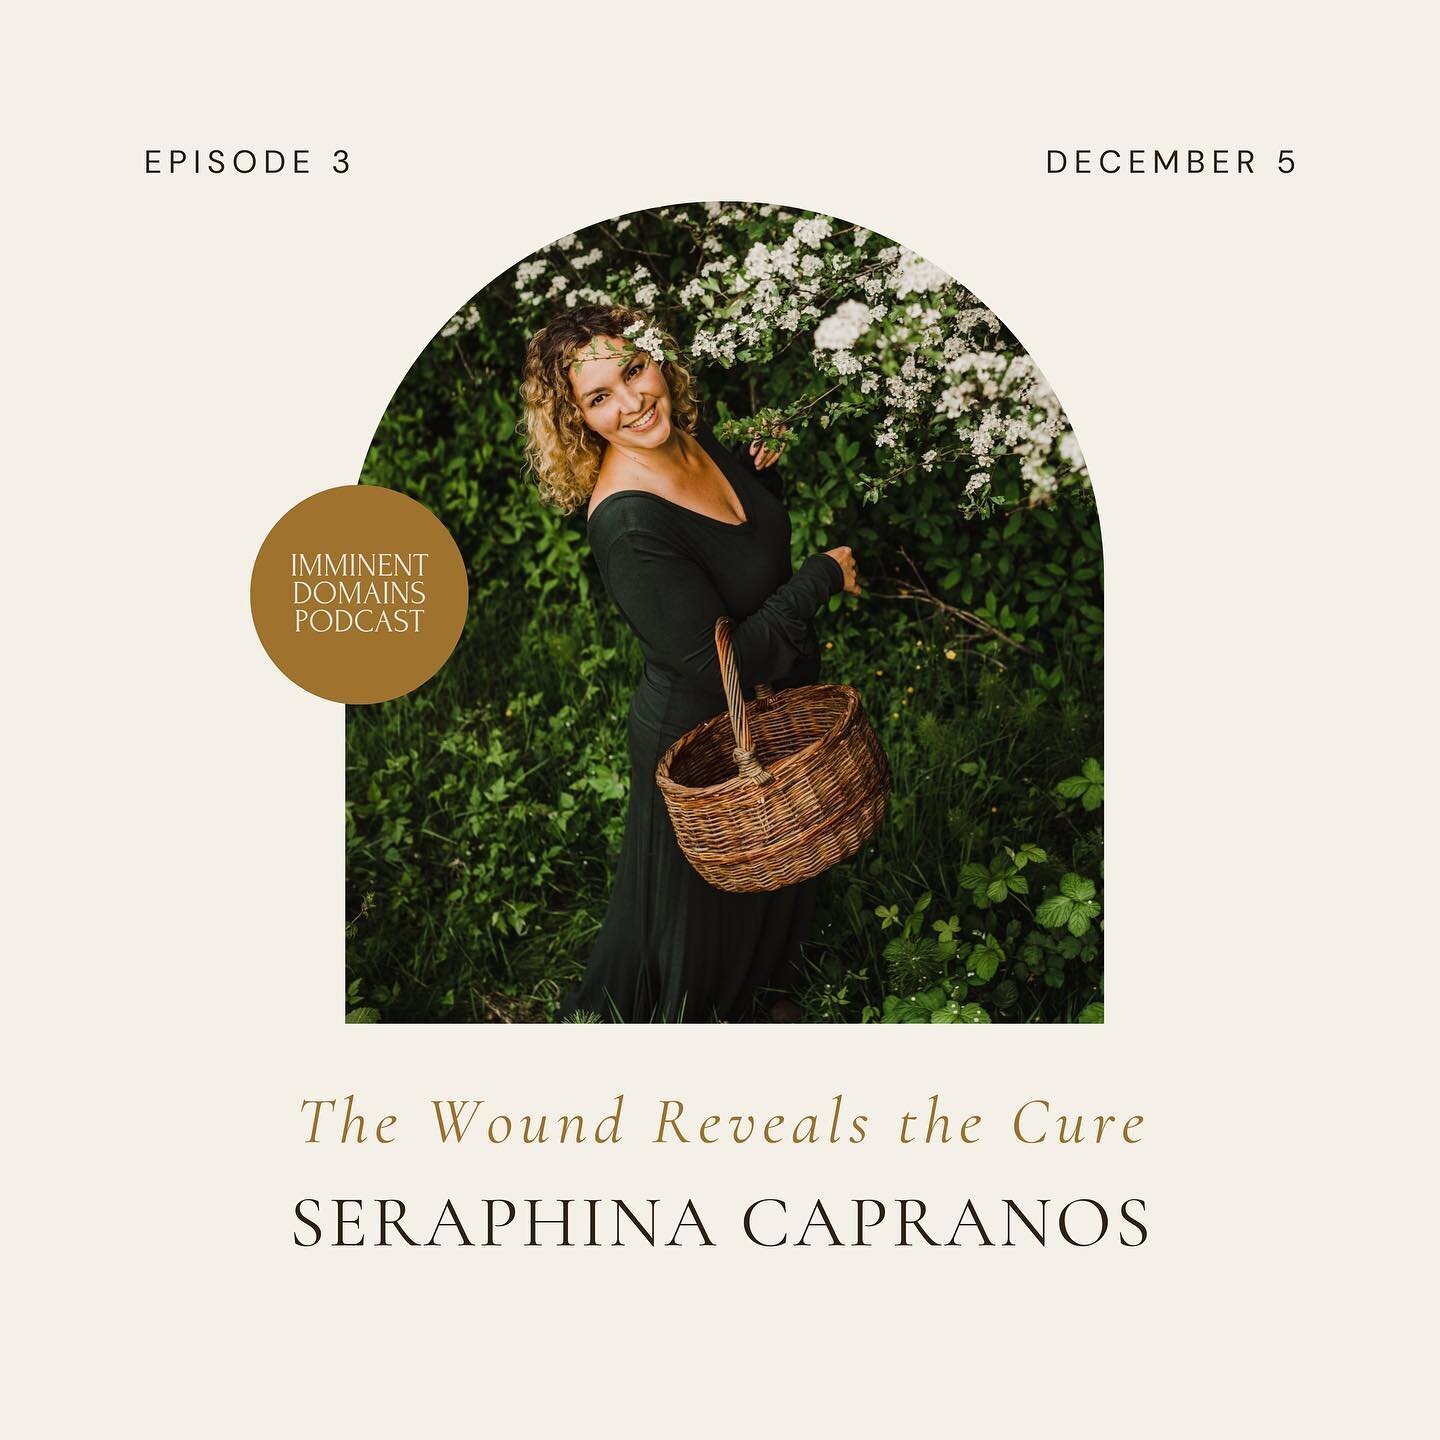 SERAPHINA CAPRANOS: The Wound Reveals the Cure 🍃 link in bio 

In Episode 3, I sit down with Seraphina Capranos, a renowned clinical herbalist, homeopath, and internationally sought-after teacher, to delve into the landscape of health sovereignty, e